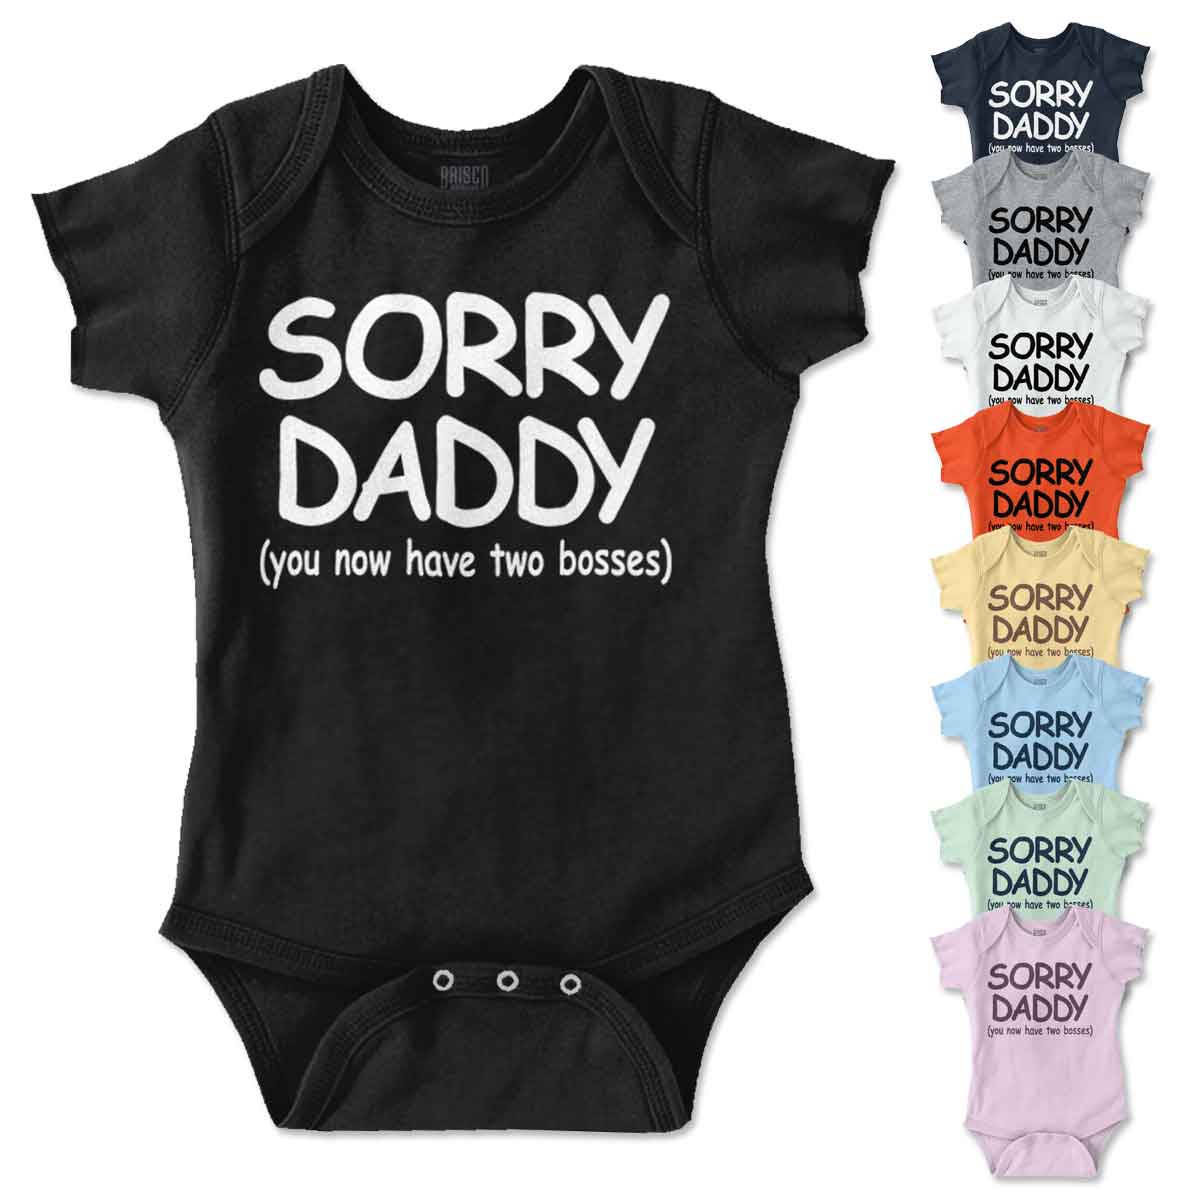 Sorry Baby Daddy Quotes
 Sorry Daddy New Parents Baby Shower Gifts Funny Saying